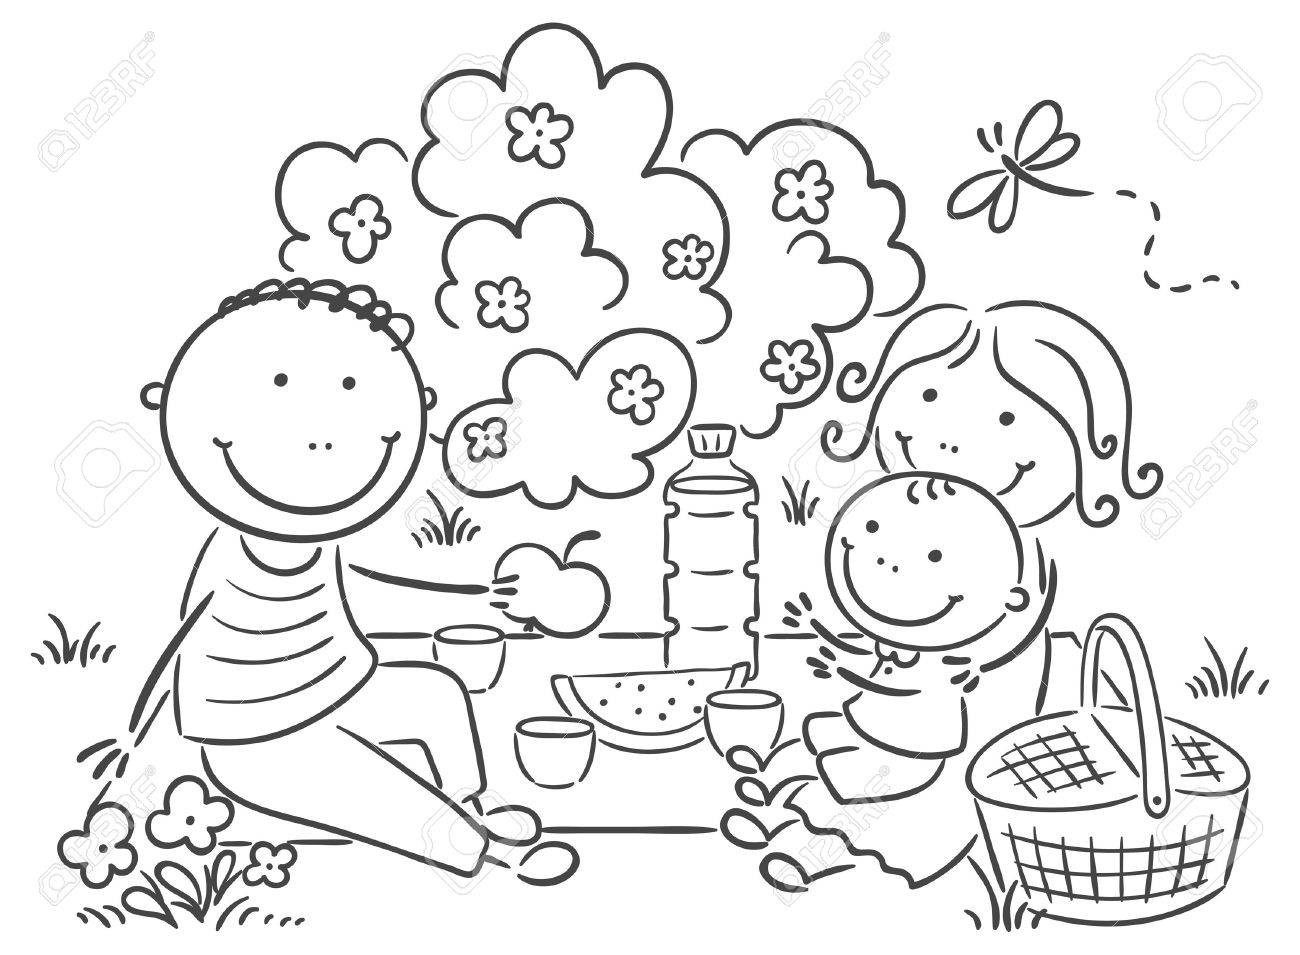 Family picnic clipart black and white